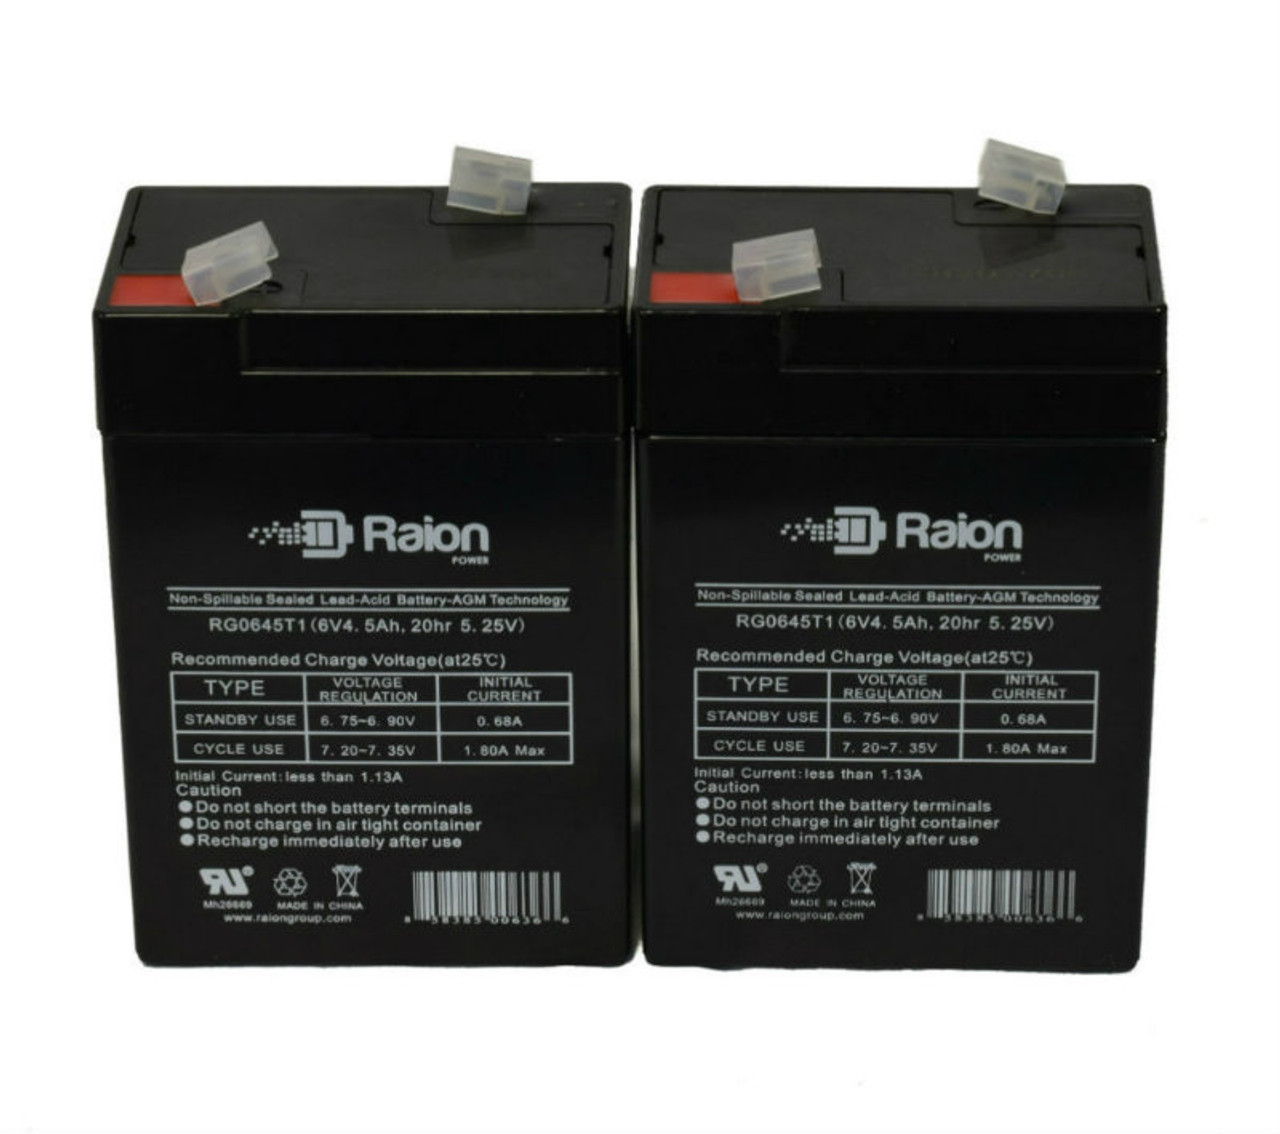 Raion Power 6V 4.5Ah Replacement Emergency Light Battery for Astralite 20-0002 - 2 Pack